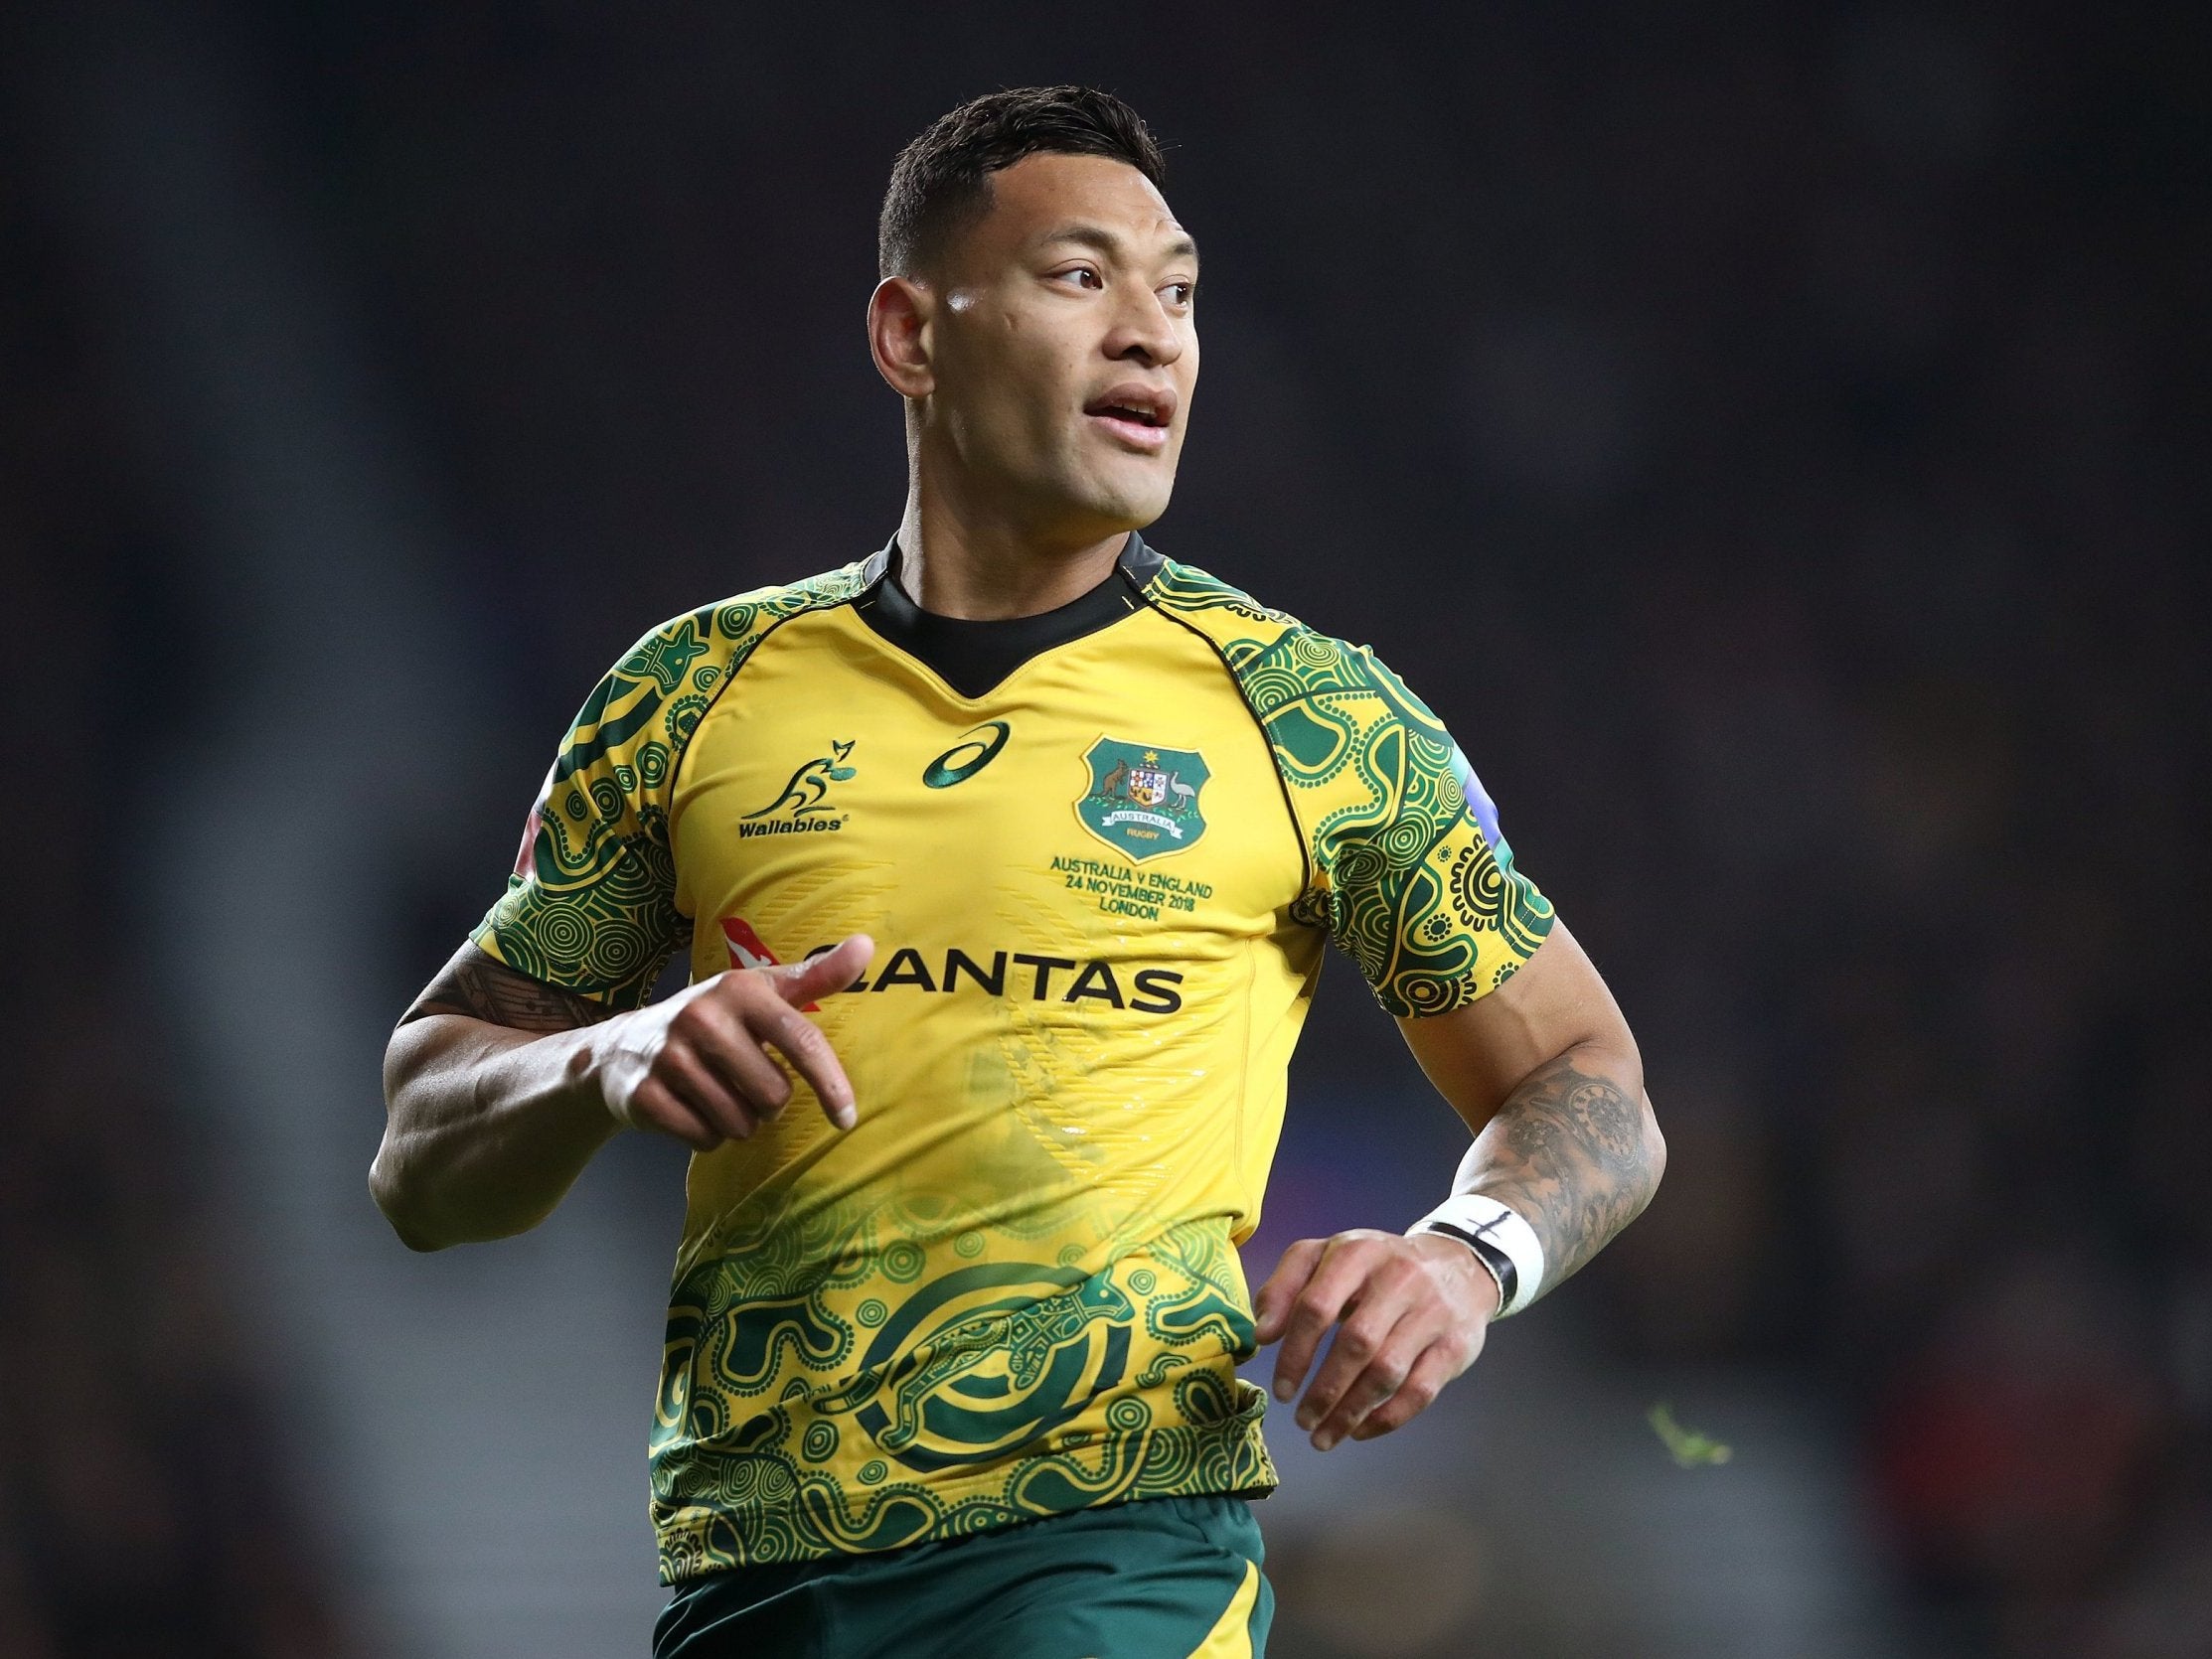 Israel Folau’s code of conduct hearing will begin on 4 May as he attempts to save his rugby career